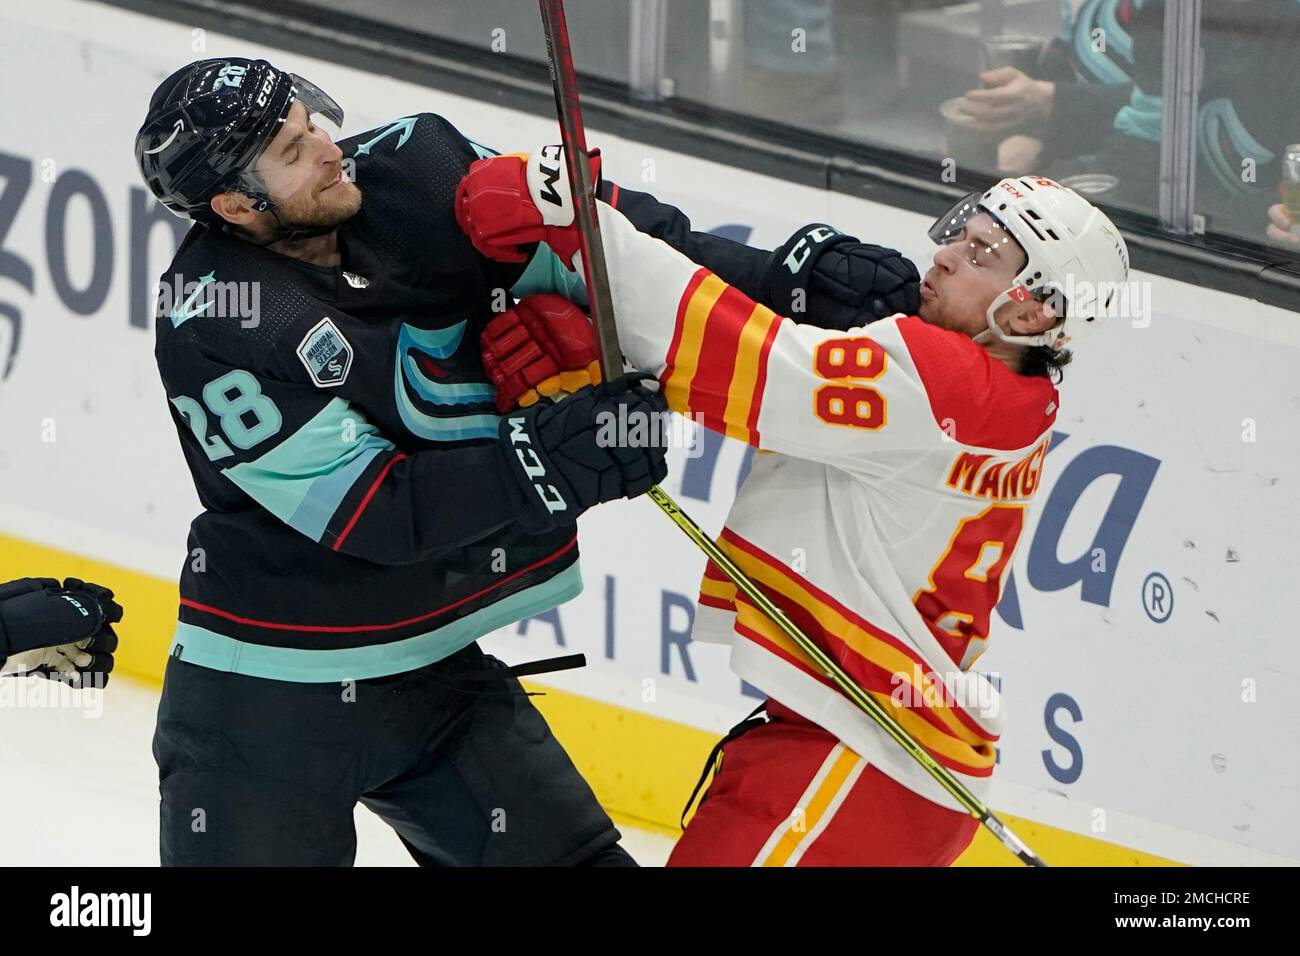 Seattle Kraken defenseman Carson Soucy (28) fights with Calgary Flames left wing Andrew Mangiapane (88) during